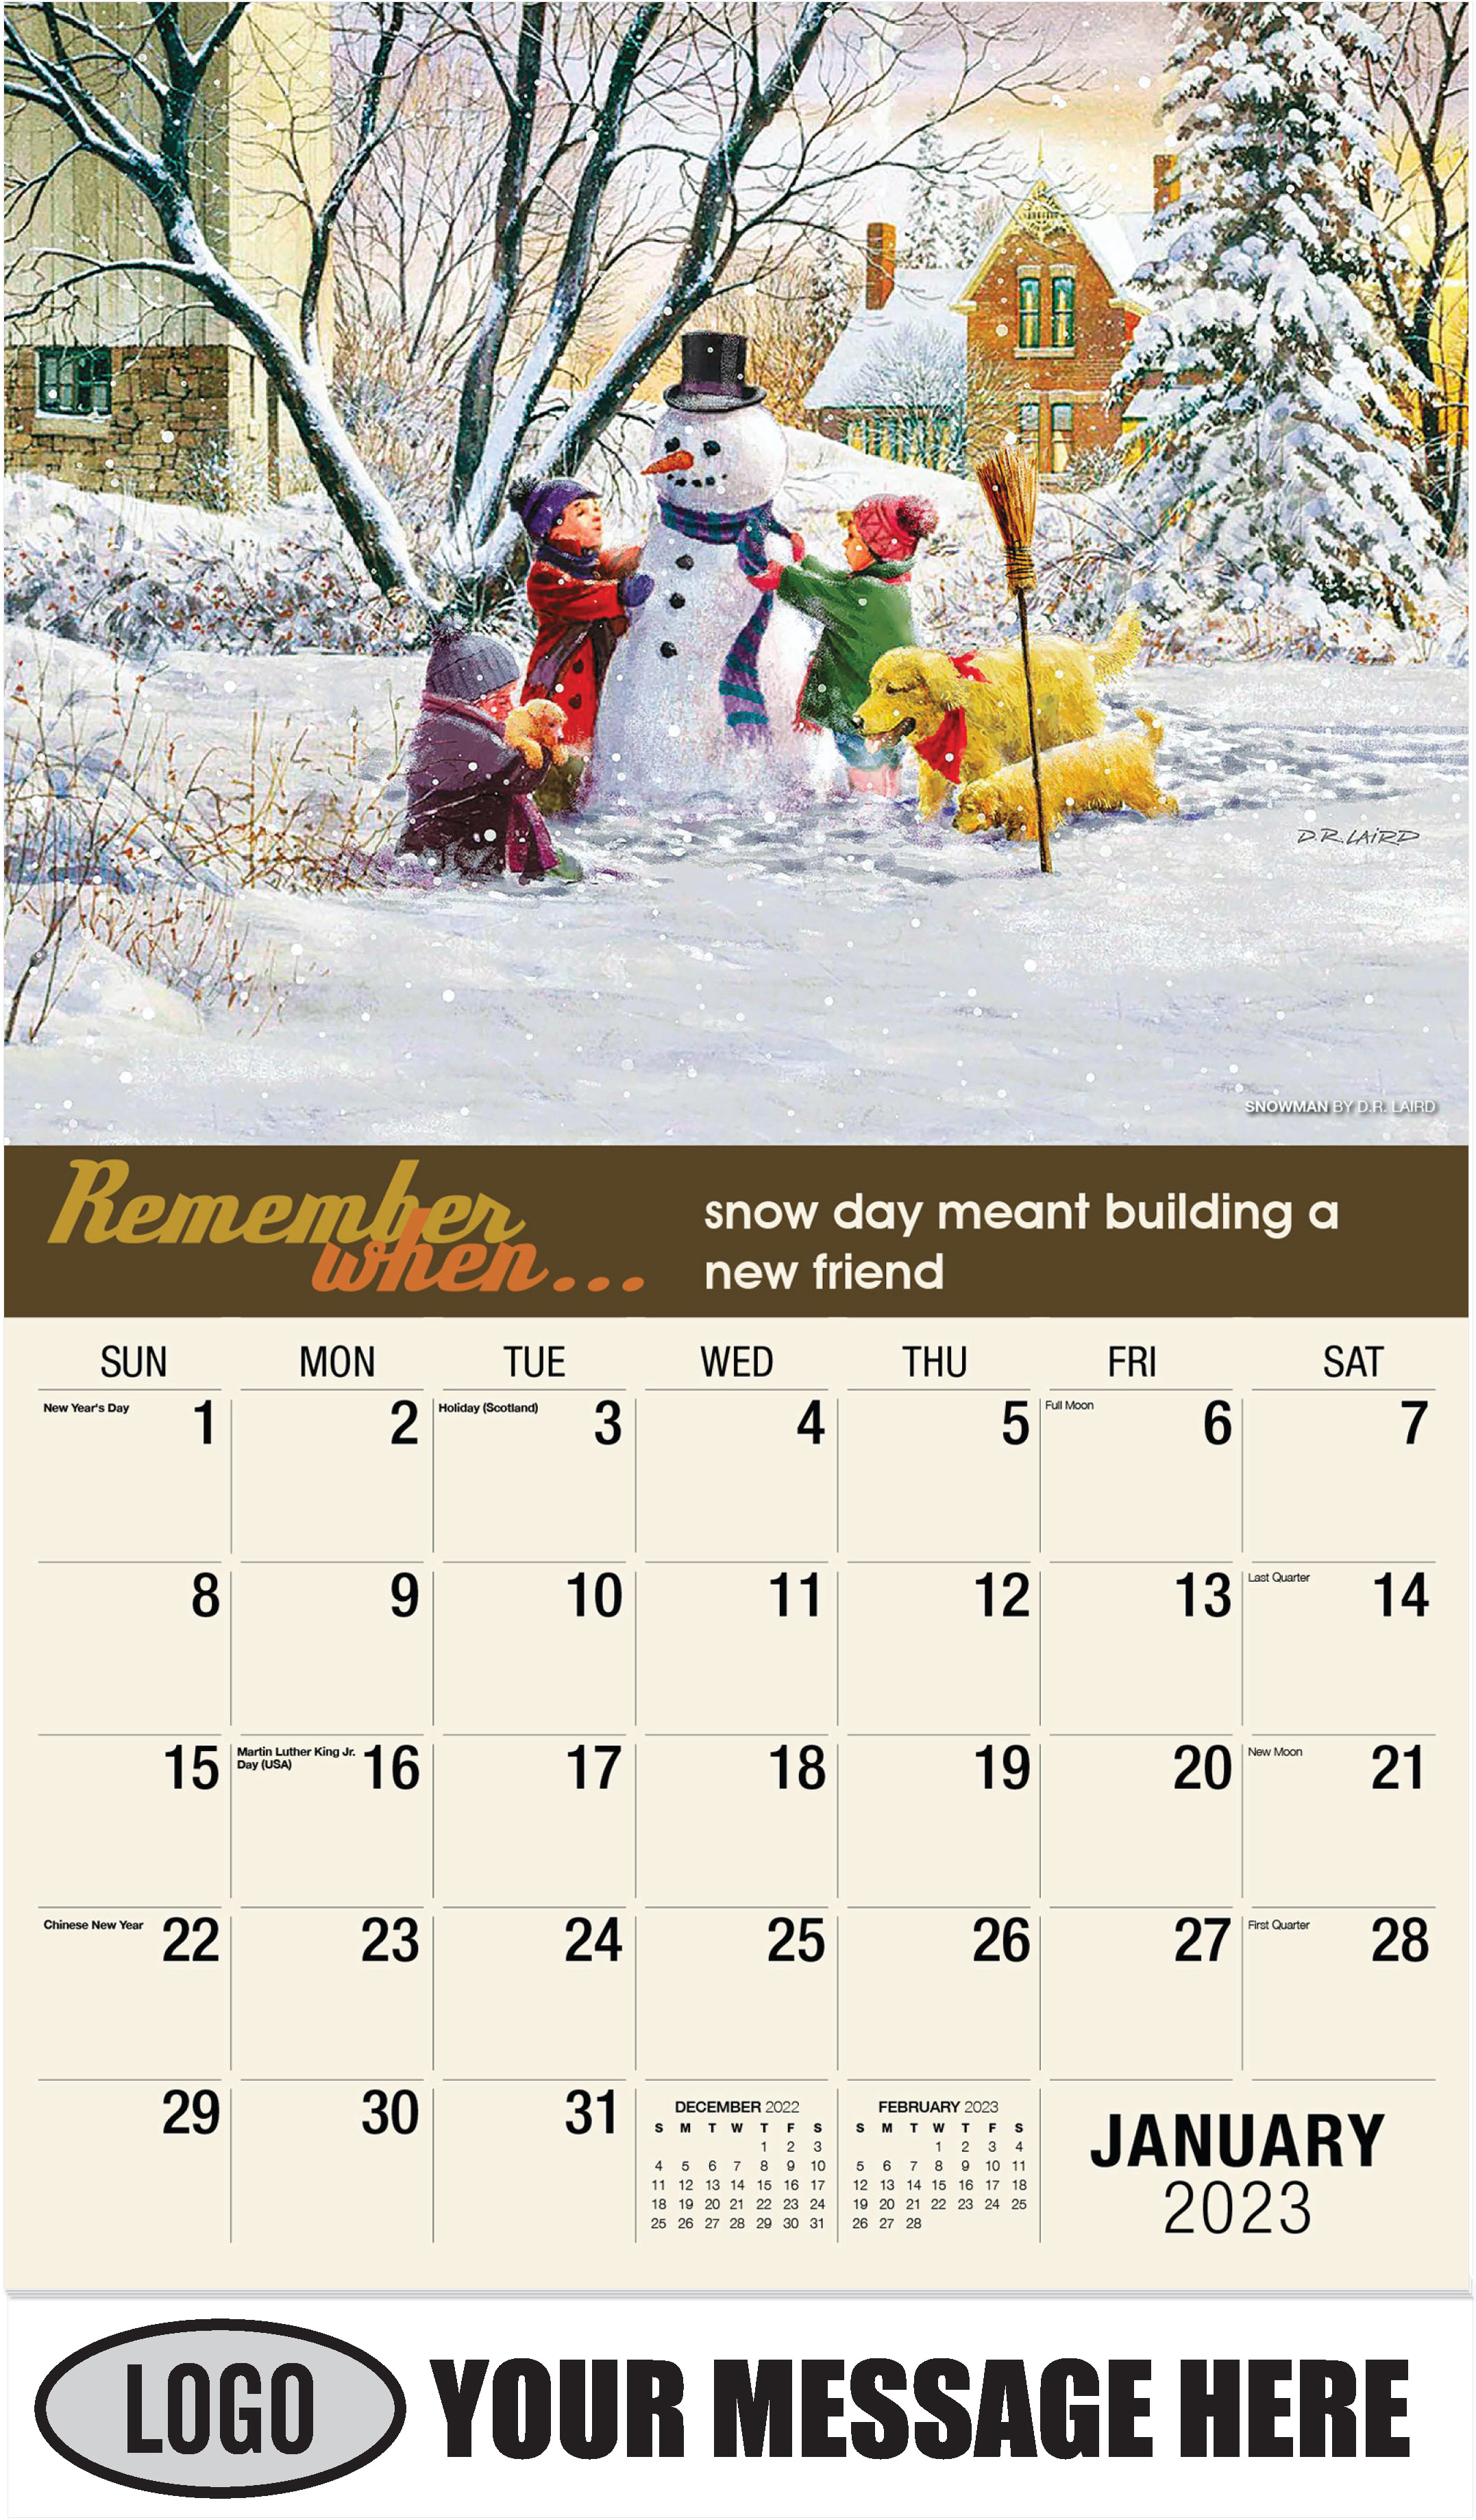 Snowman by D.R. Laird - January - Remember When 2023 Promotional Calendar